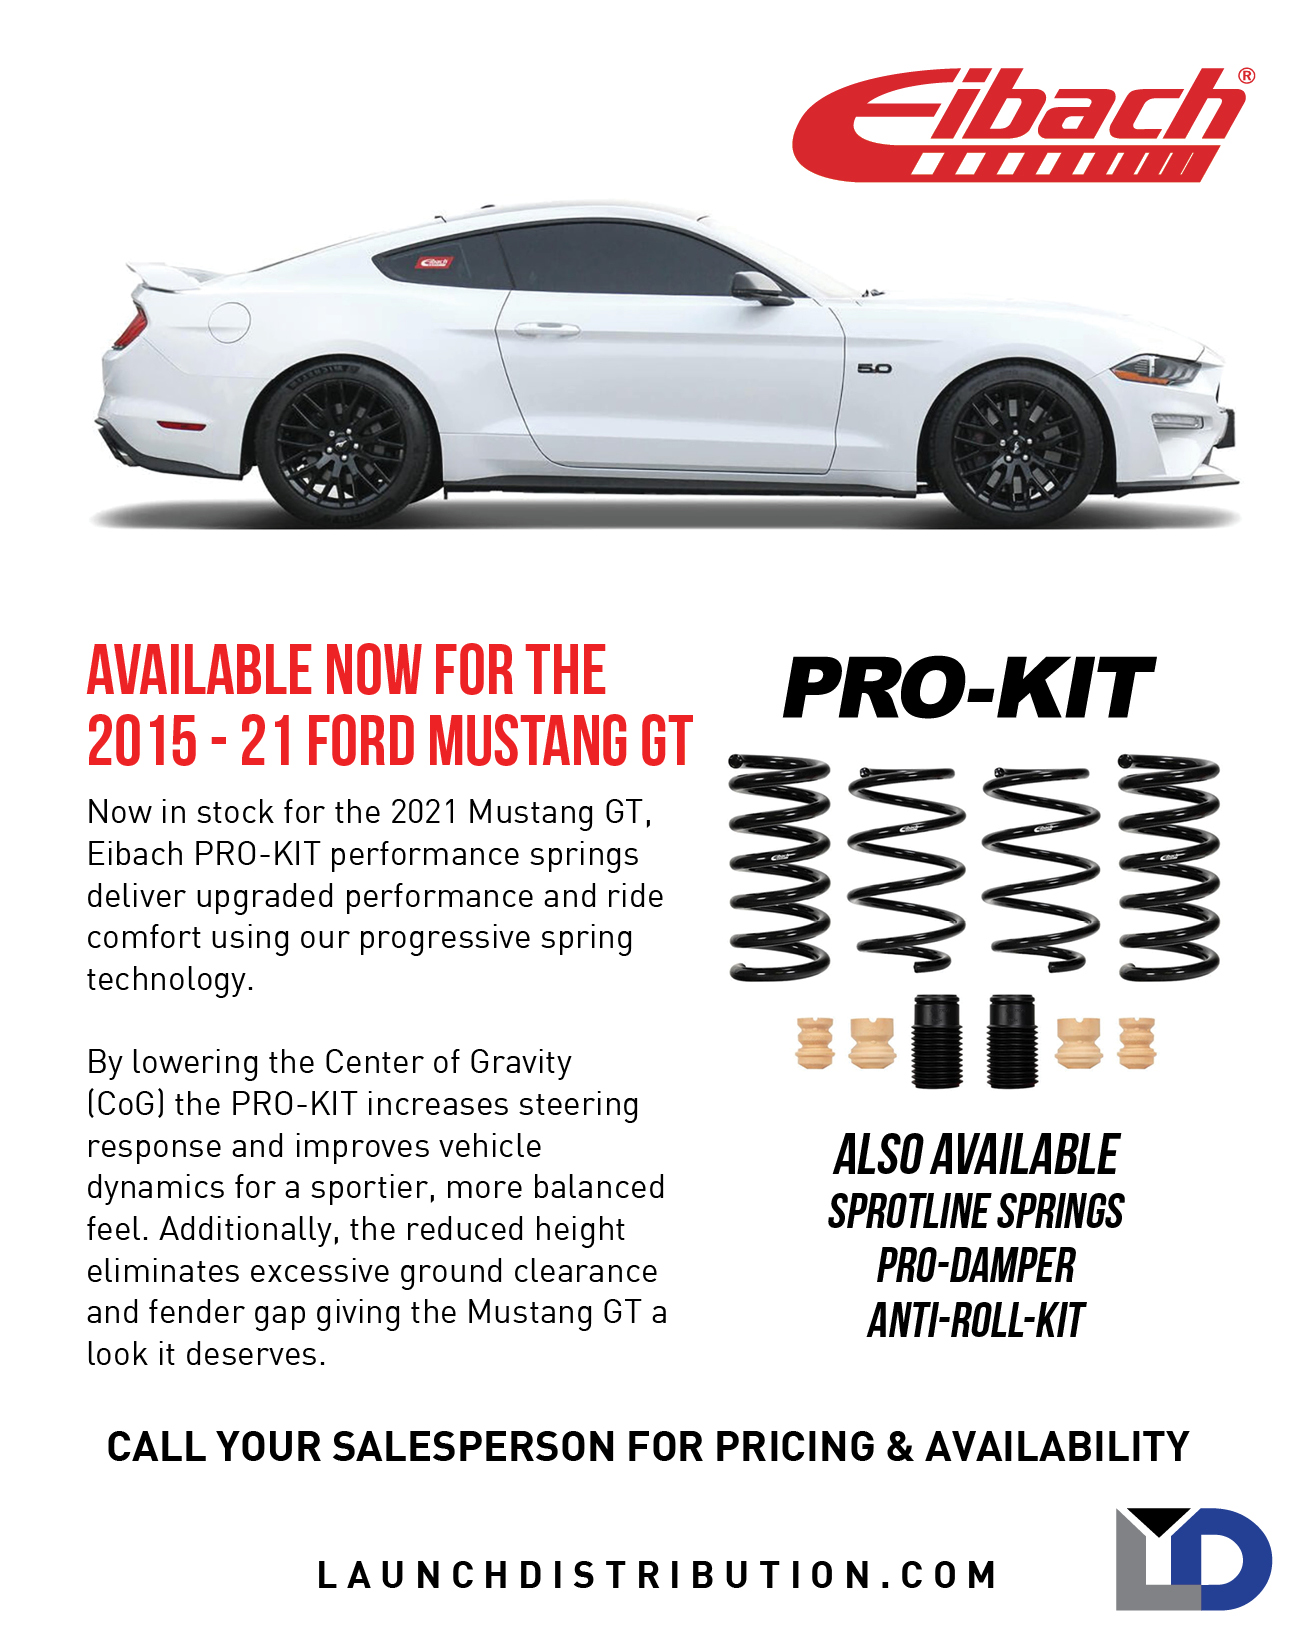 Eibach Ford Mustang GT PRO-KIT